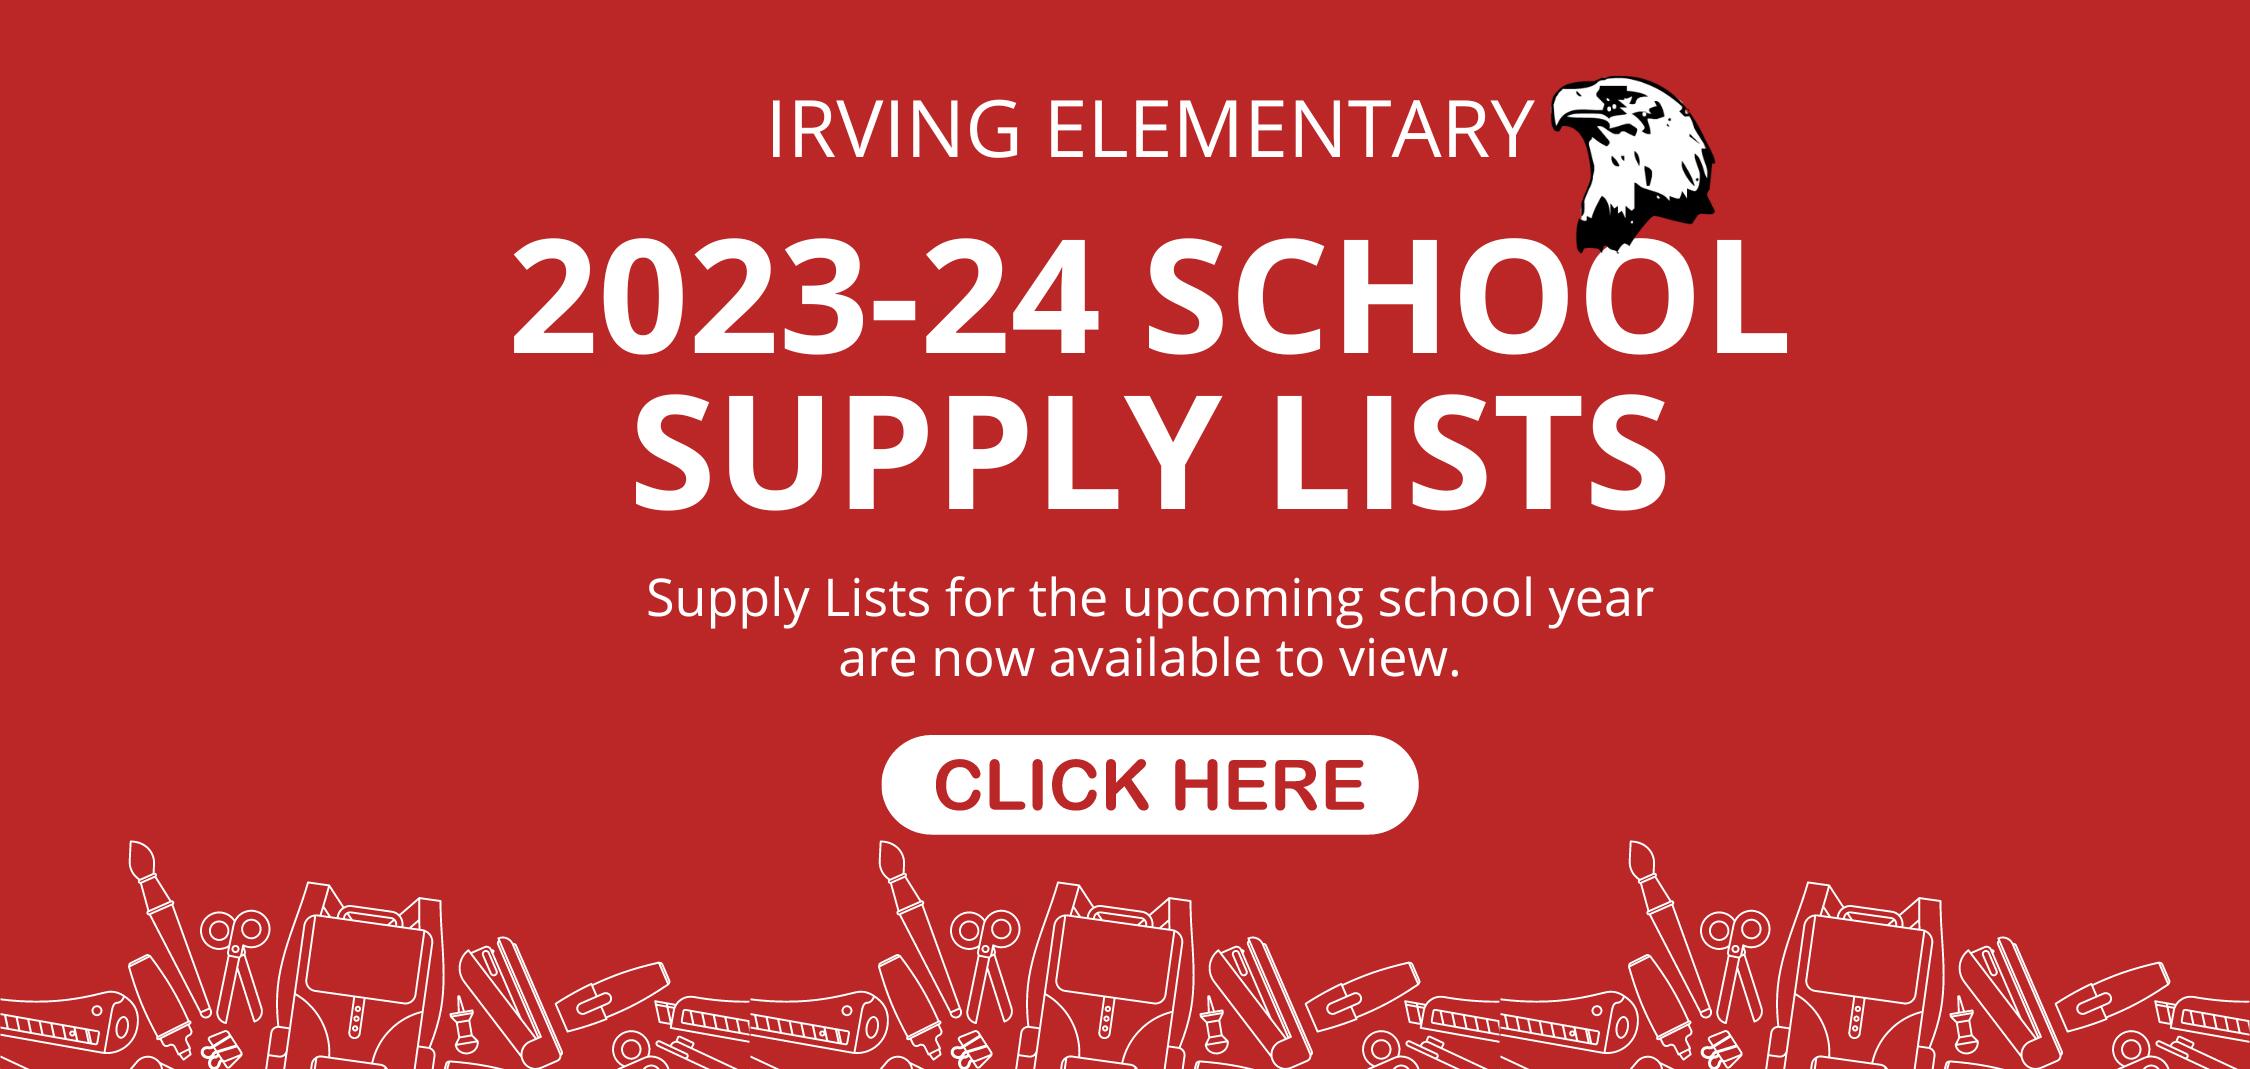 Click Here for Irving Elementary's  2023-24 School Supply Lists